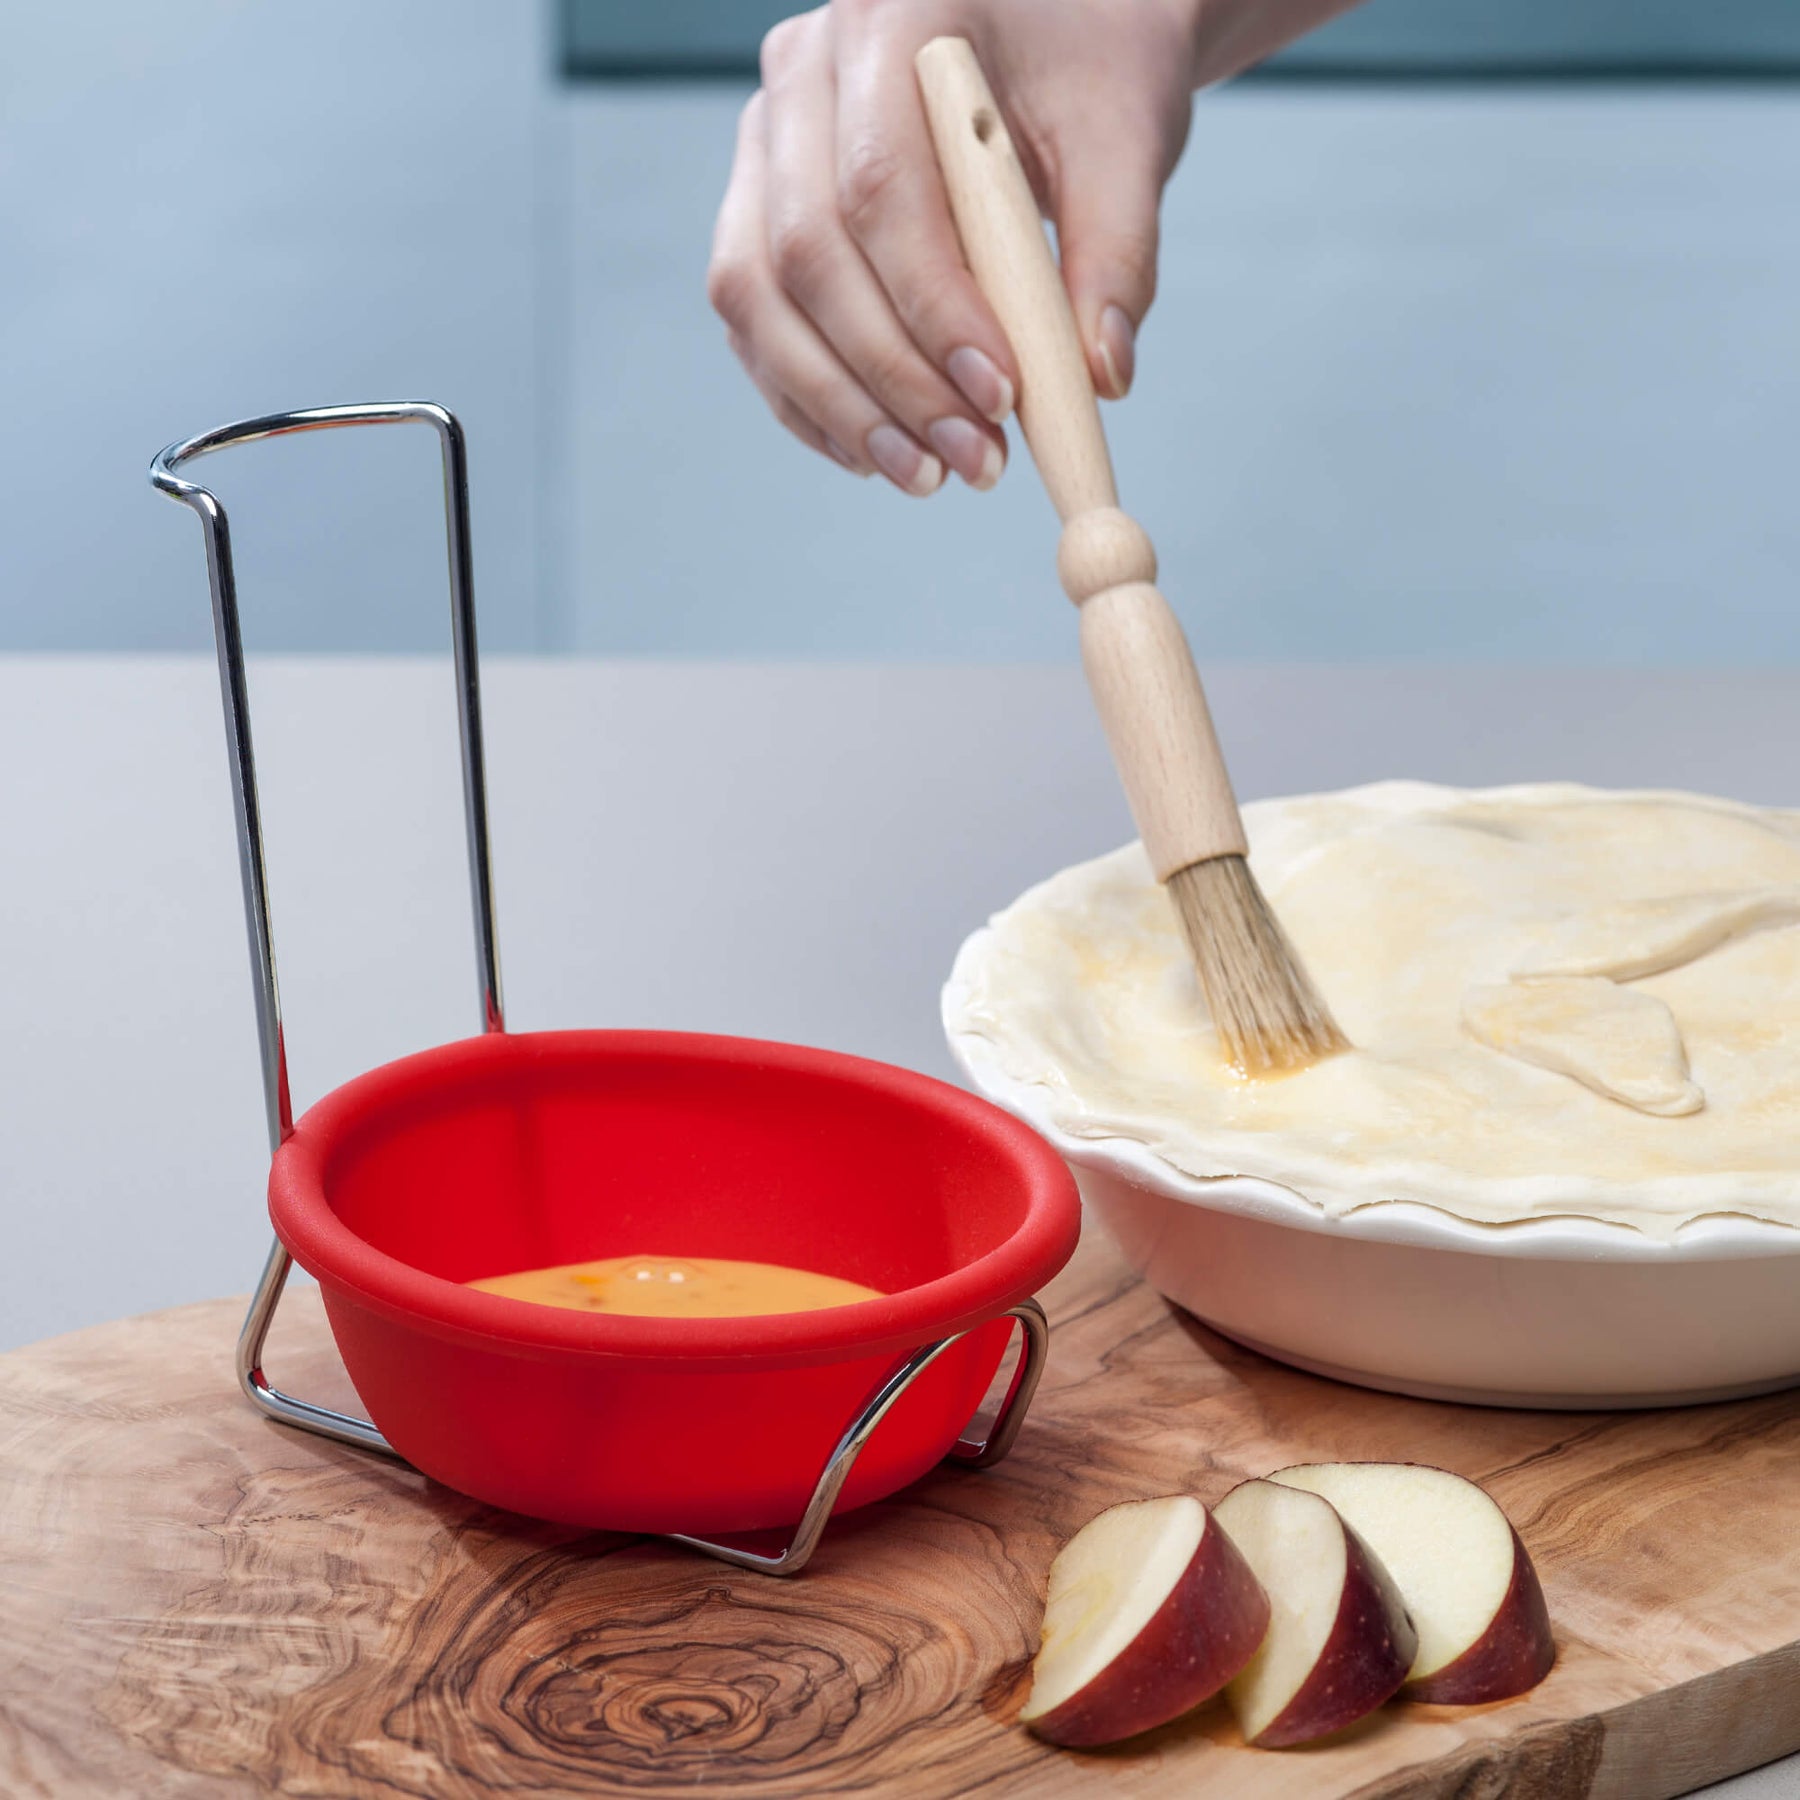 Silicone Spoon Rest and Basting Bowl with Chrome Stand